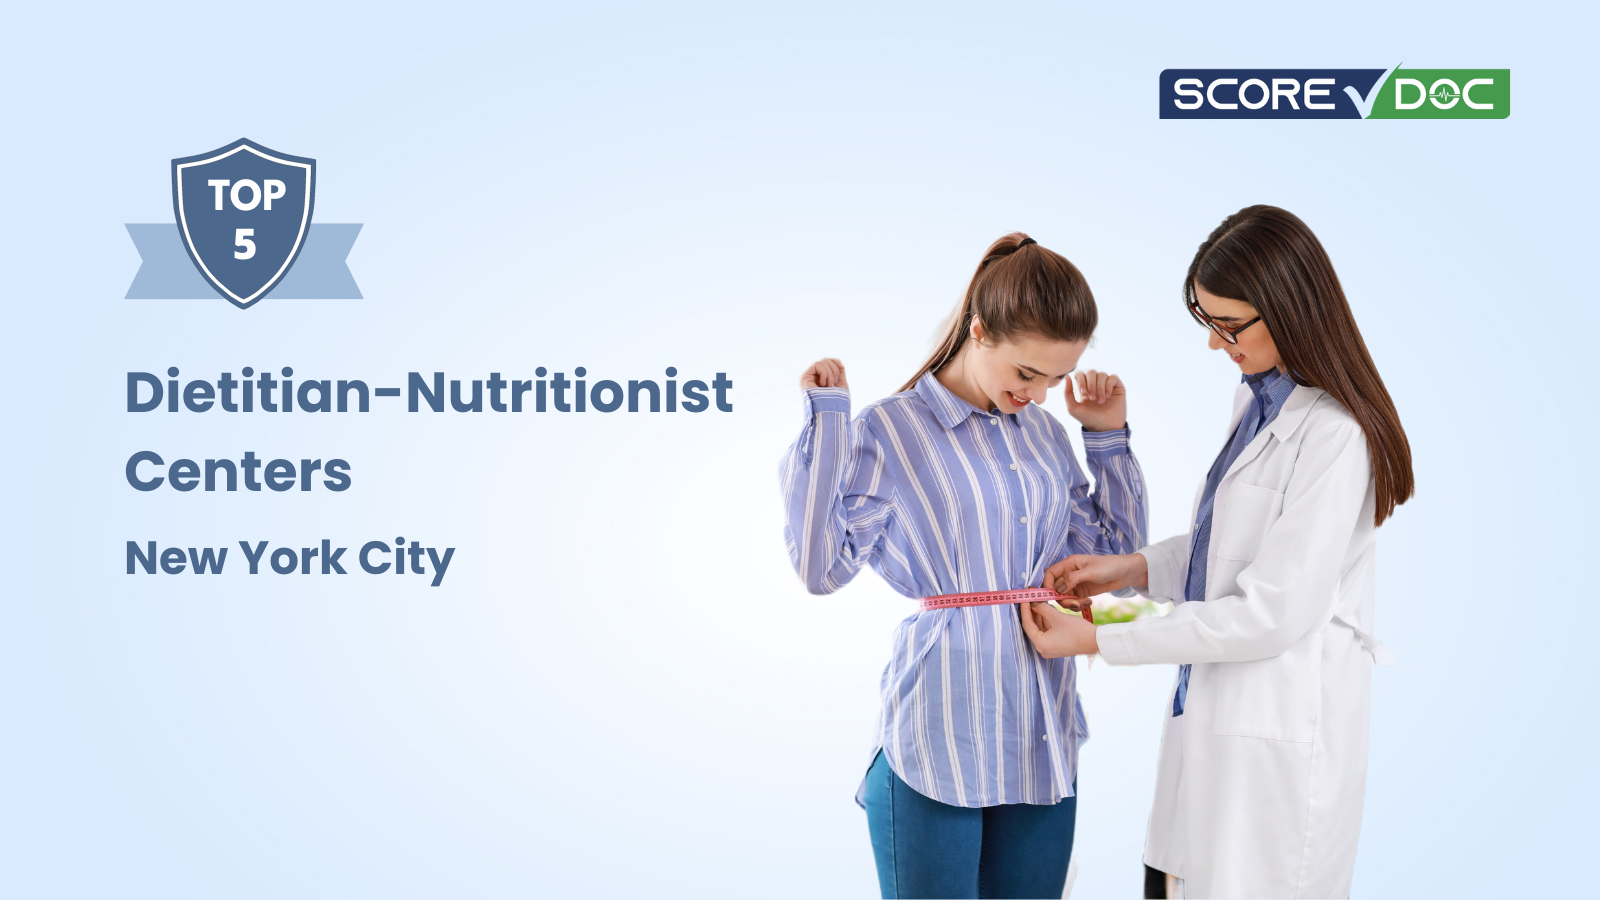 5 Top Rated Dietitian-Nutritionist Centers in New York City